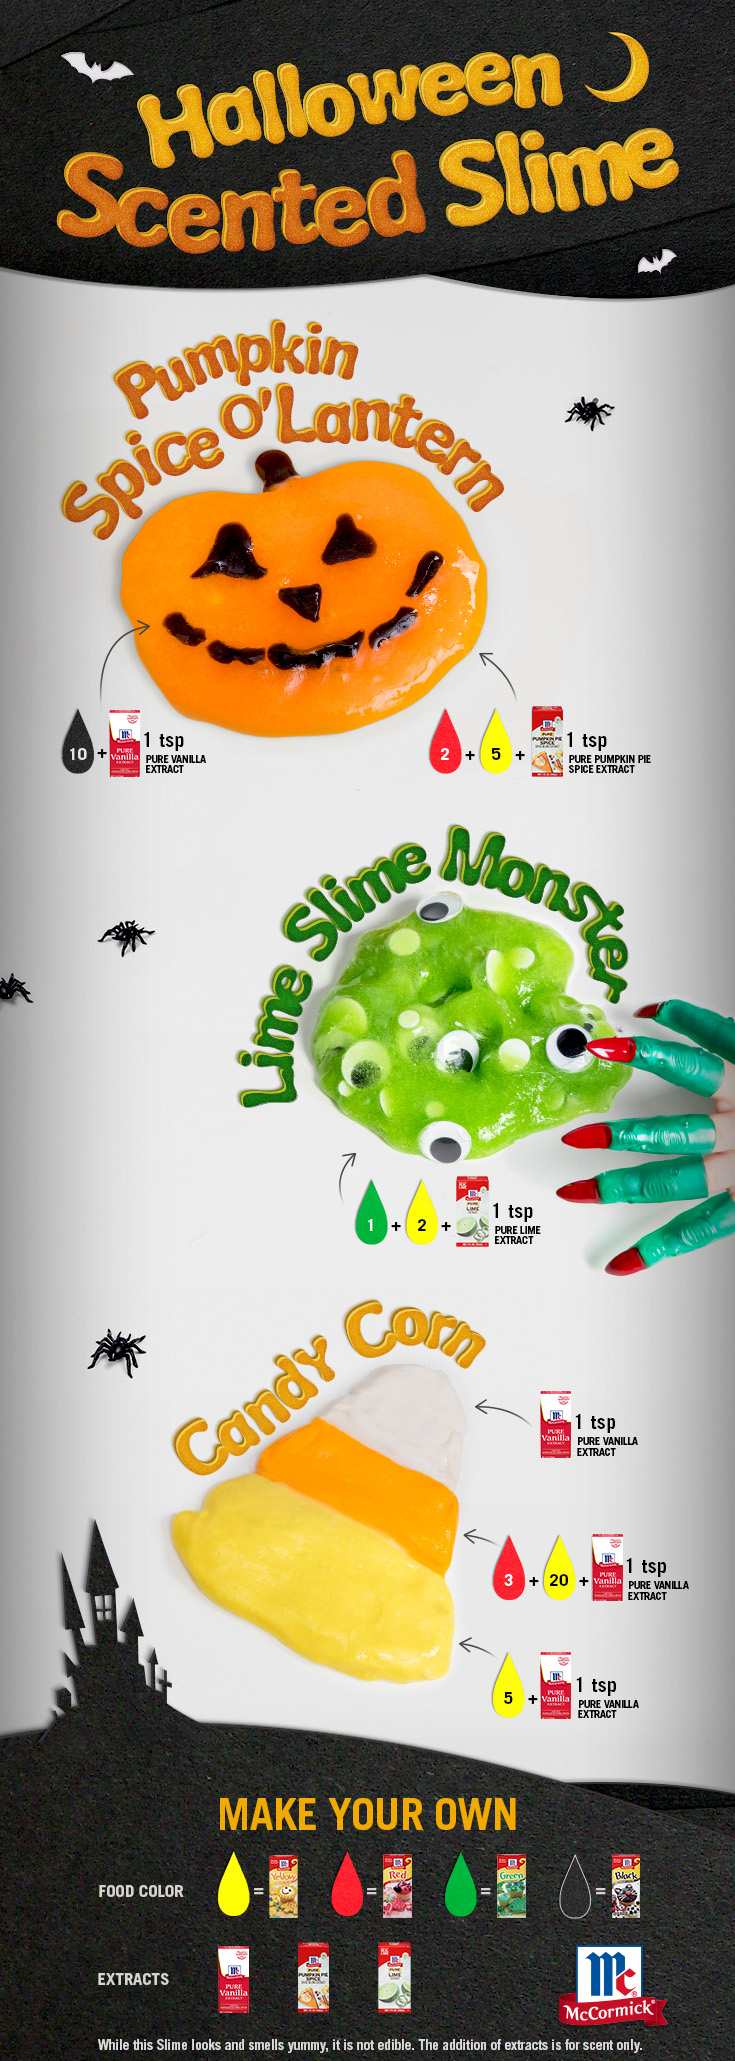 Holloween Scented Slime Image